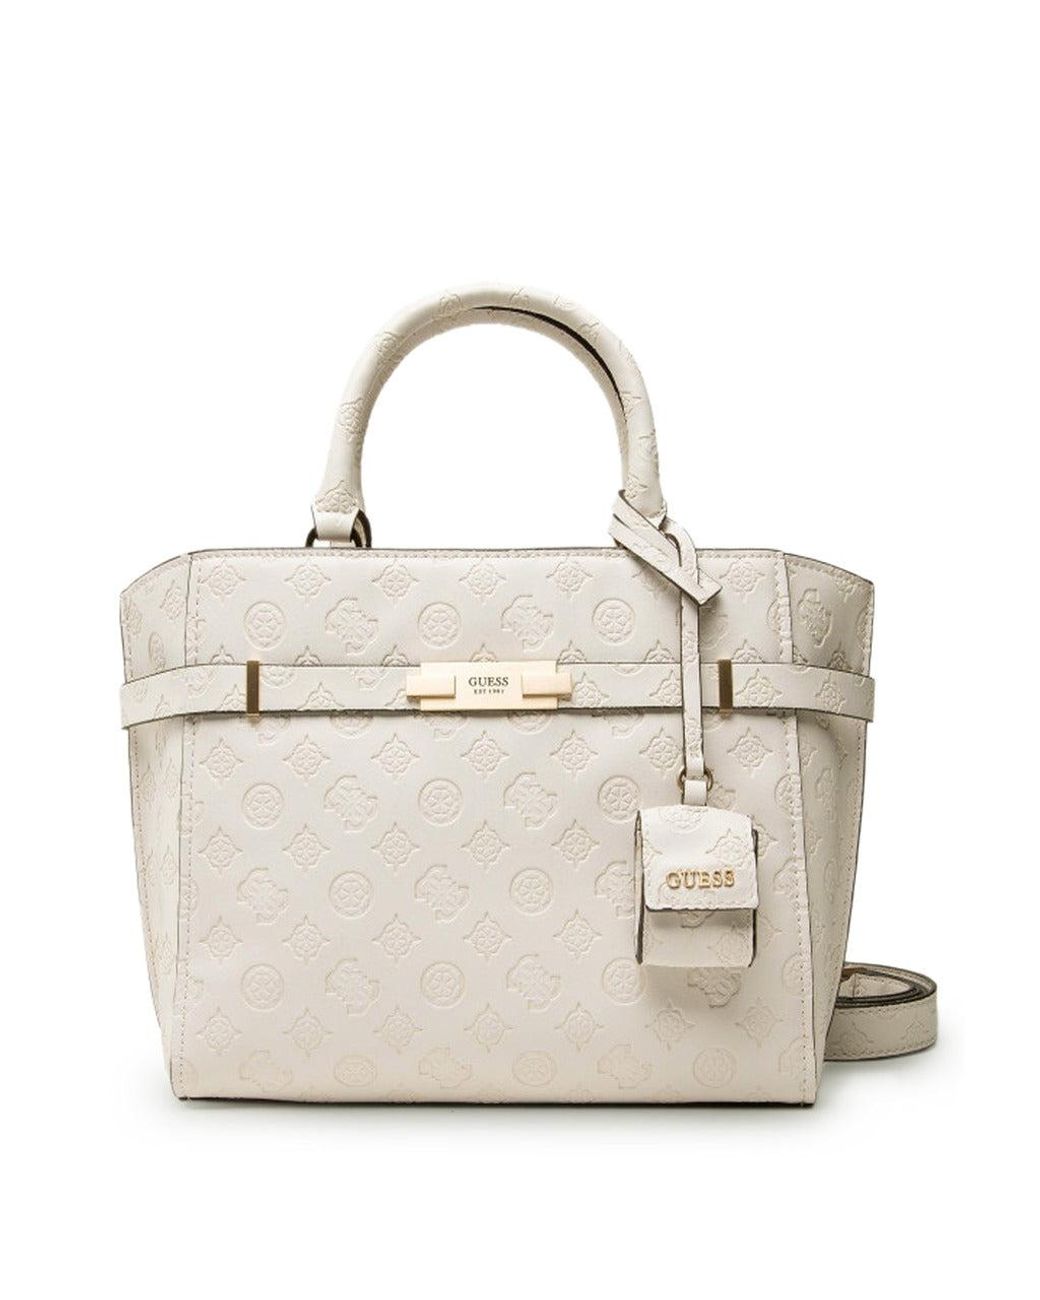 Guess Embossed Logo Covered Magnetic Closure Handbag in White - Save 24% -  Lyst